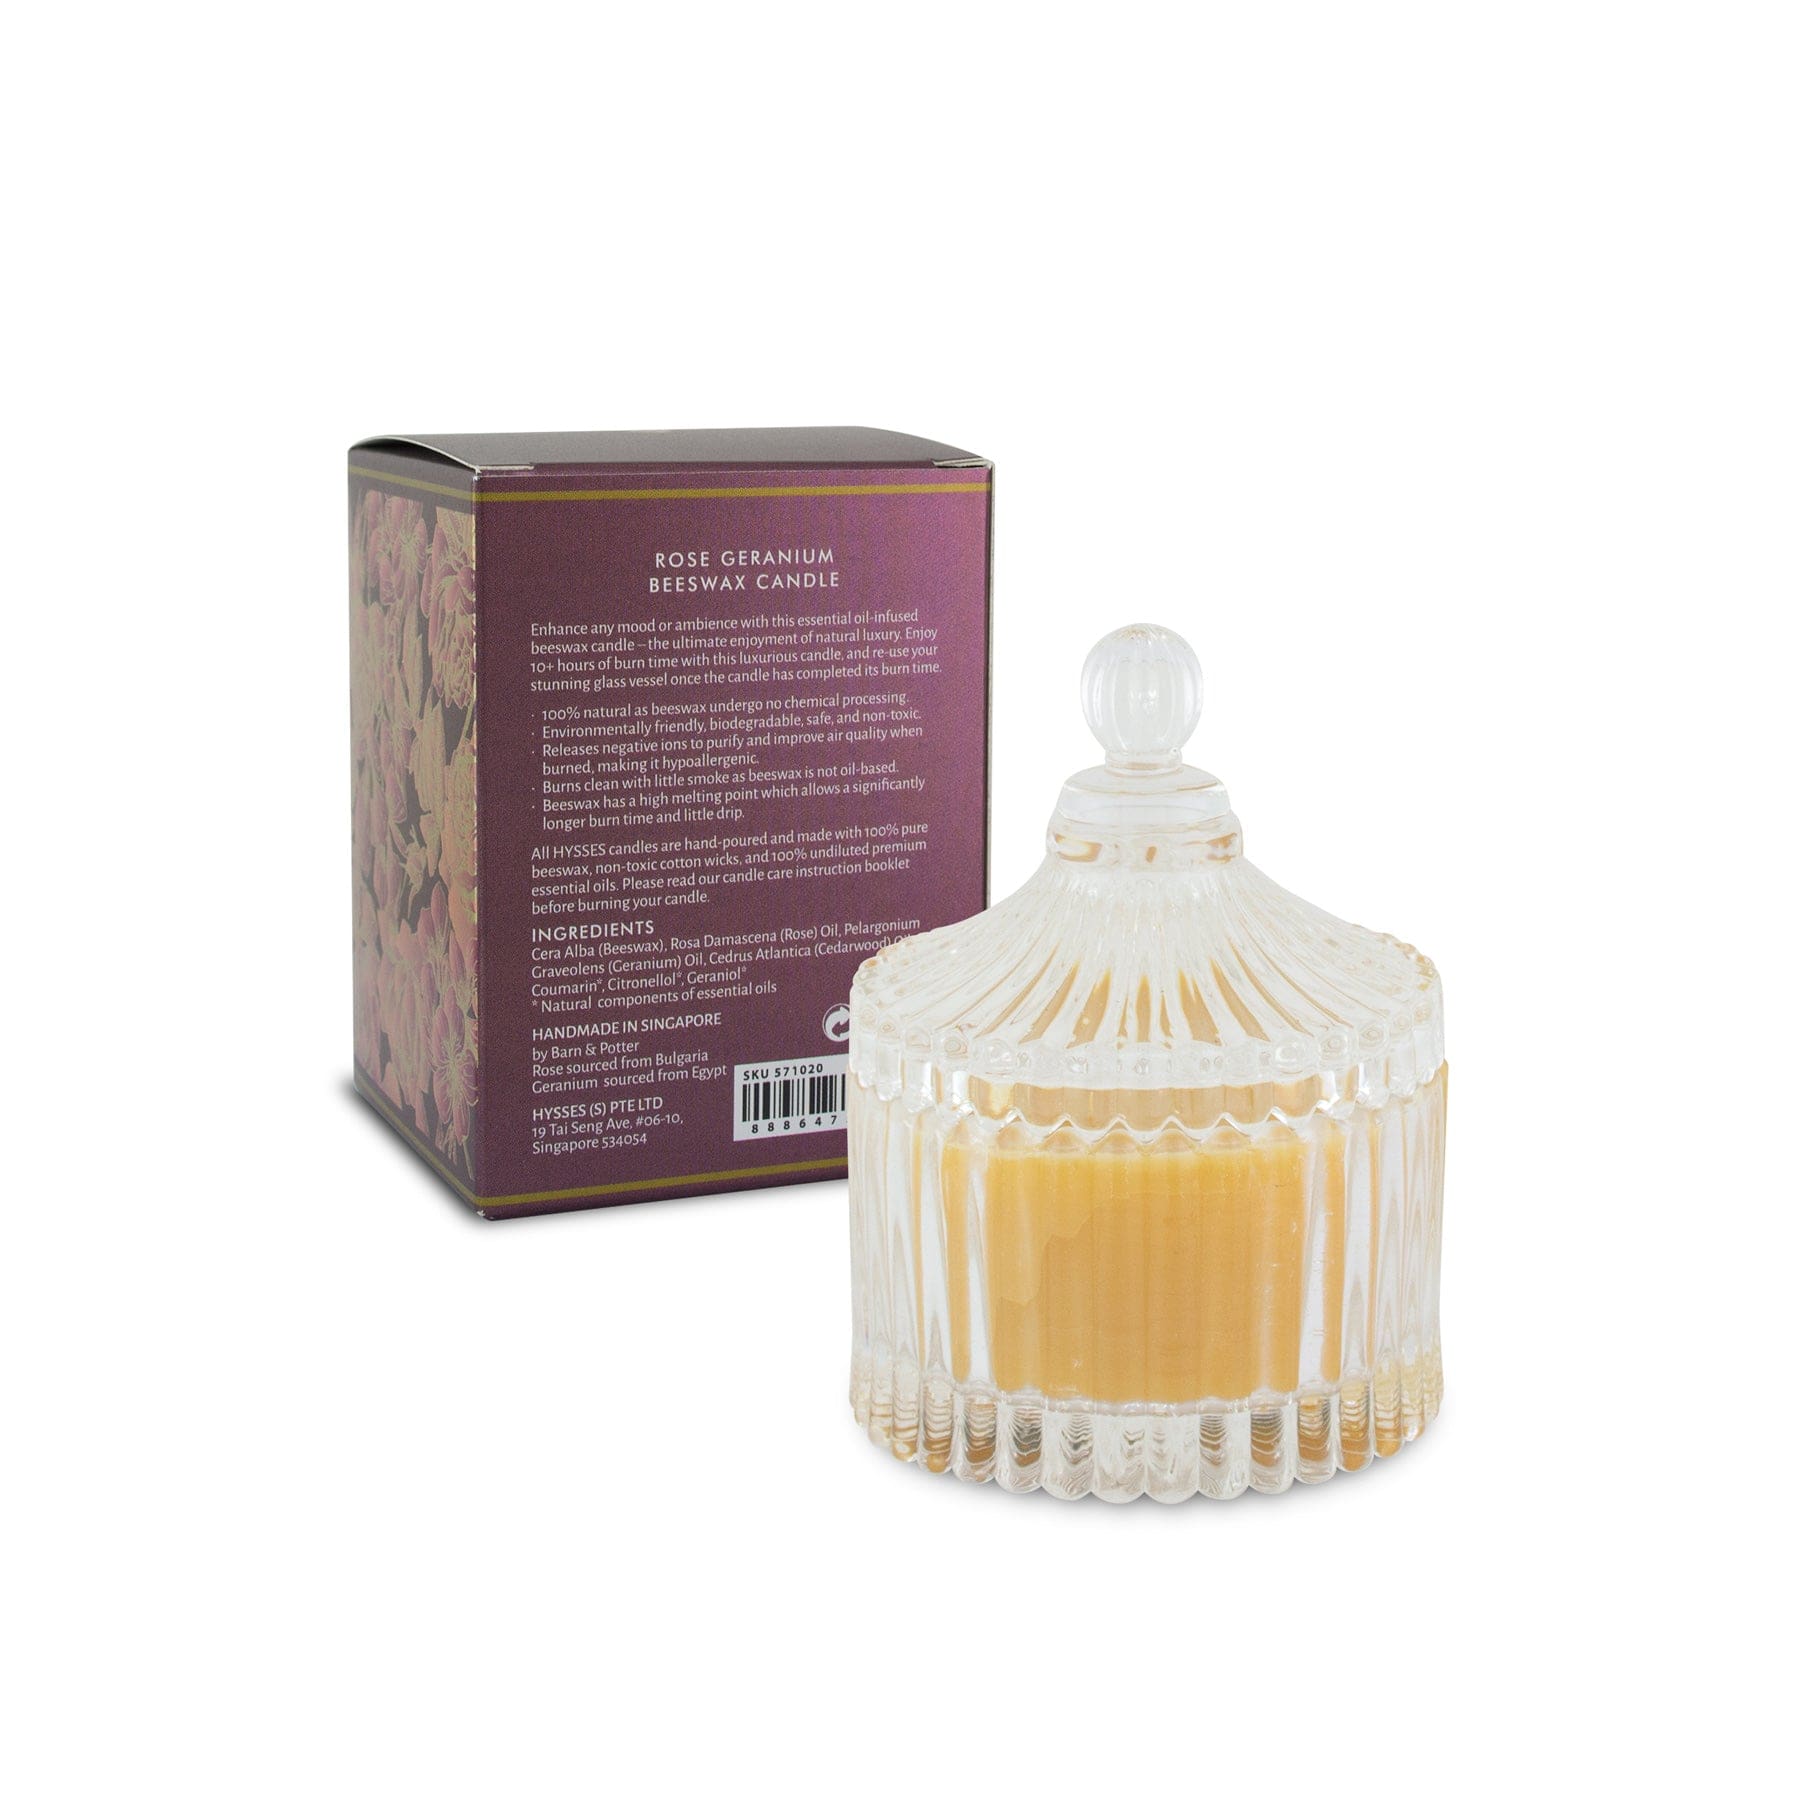 Hysses Home Scents 200g Beeswax Candle Rose Geranium, 100g